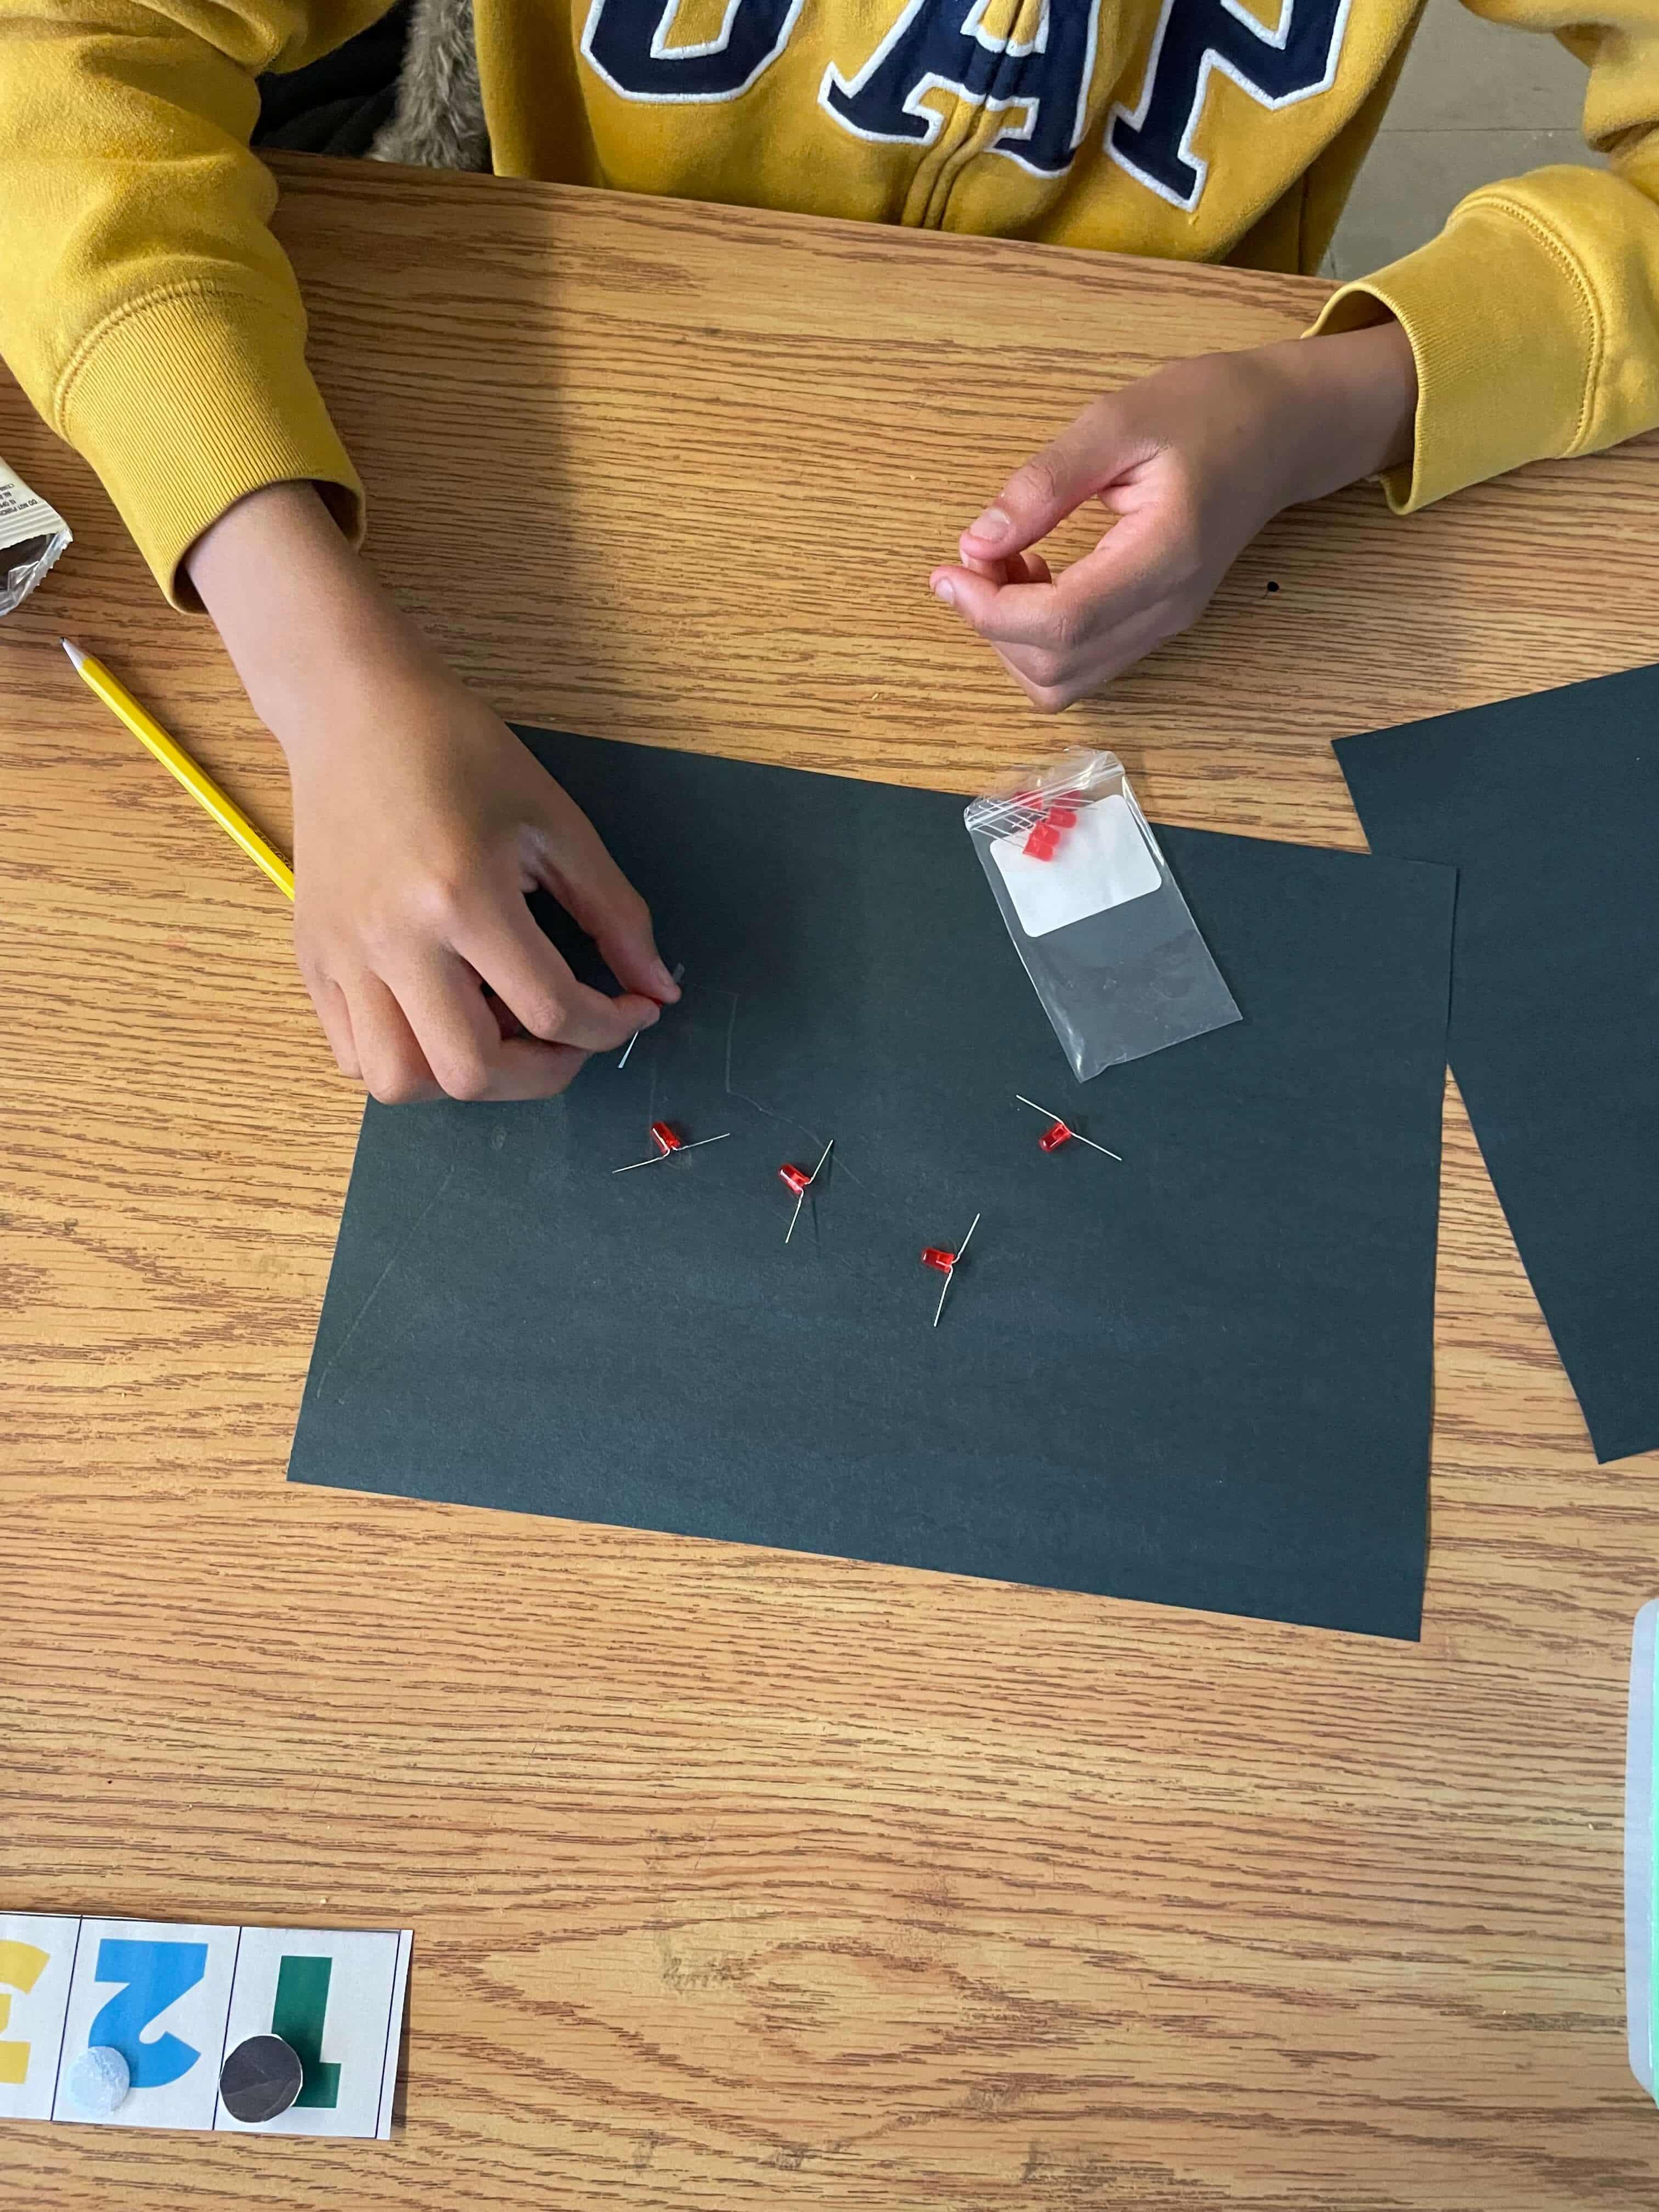 A student in a yellow sweater placing red LEDs onto a piece of black construction paper.